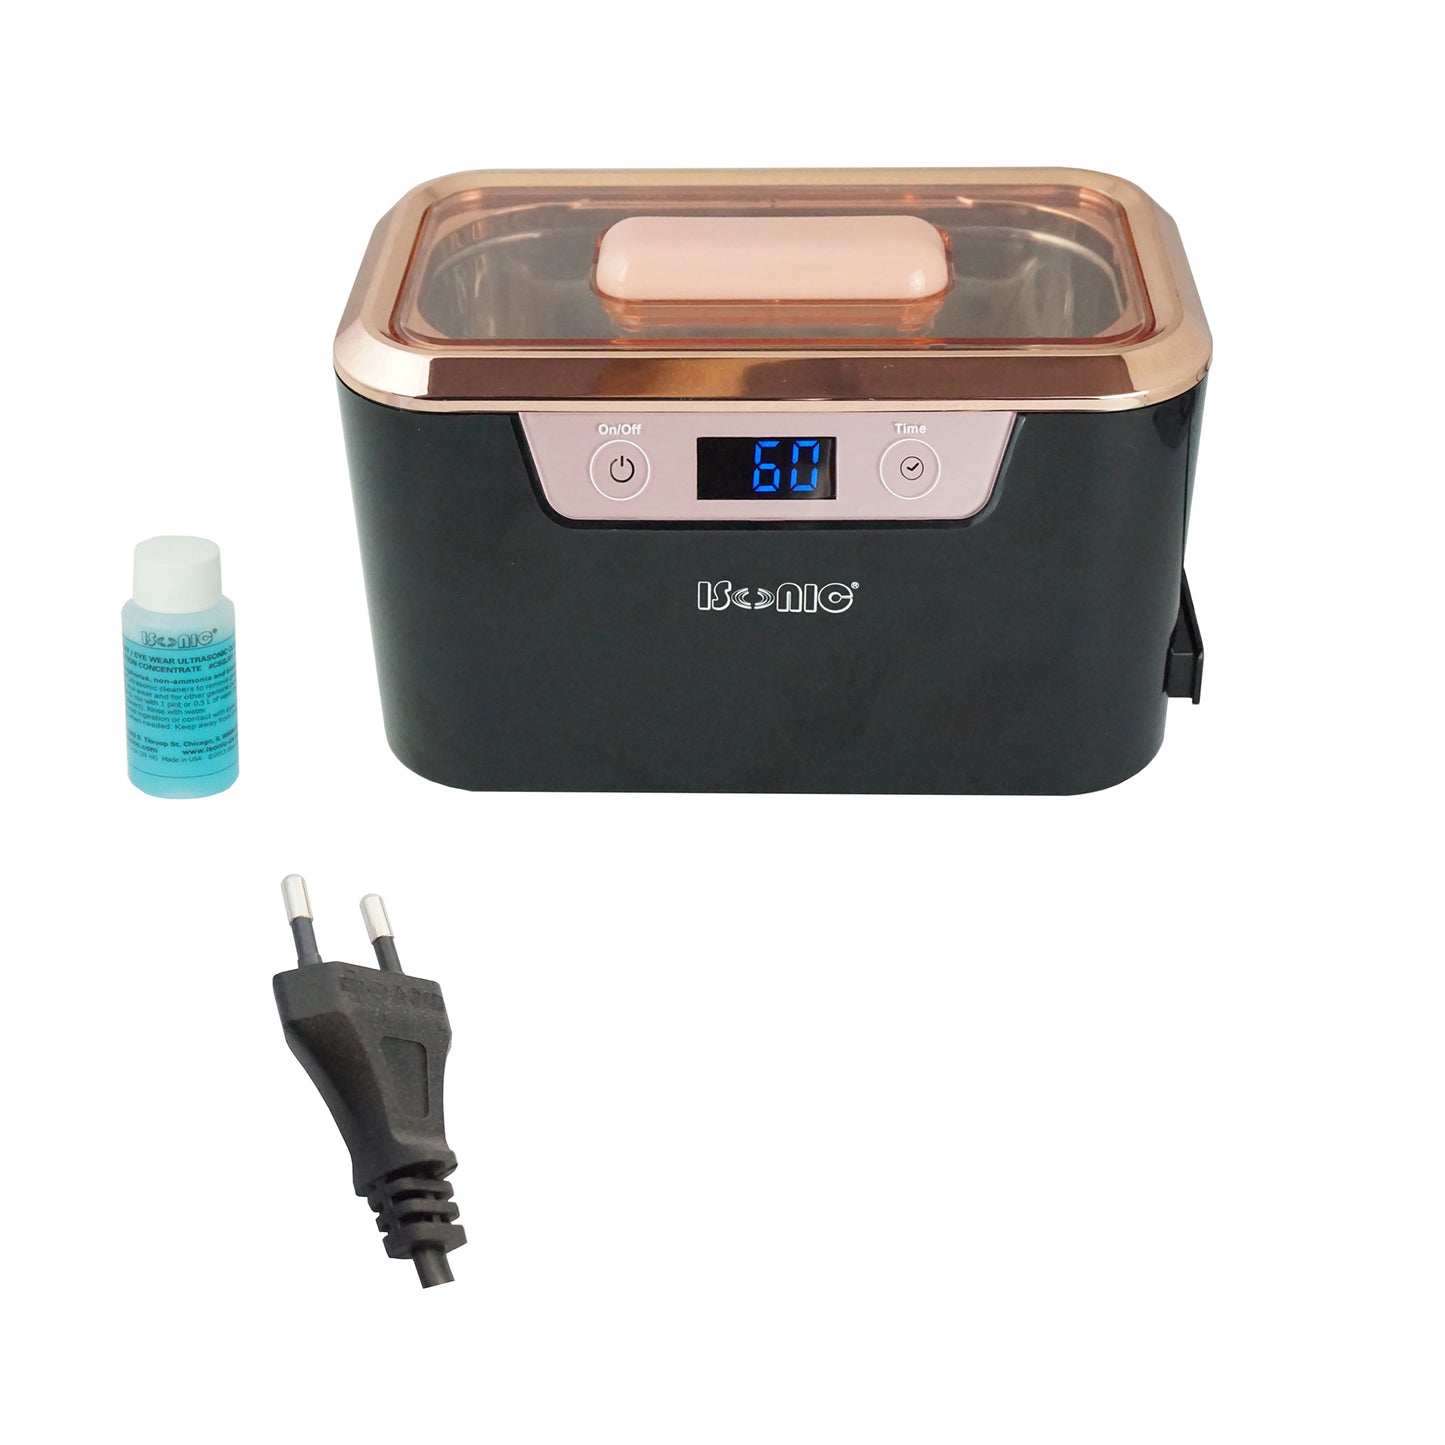 DS310B-BR | iSonic® Miniaturized Commercial Ultrasonic Cleaner, black and rose gold colors, with a flat lid